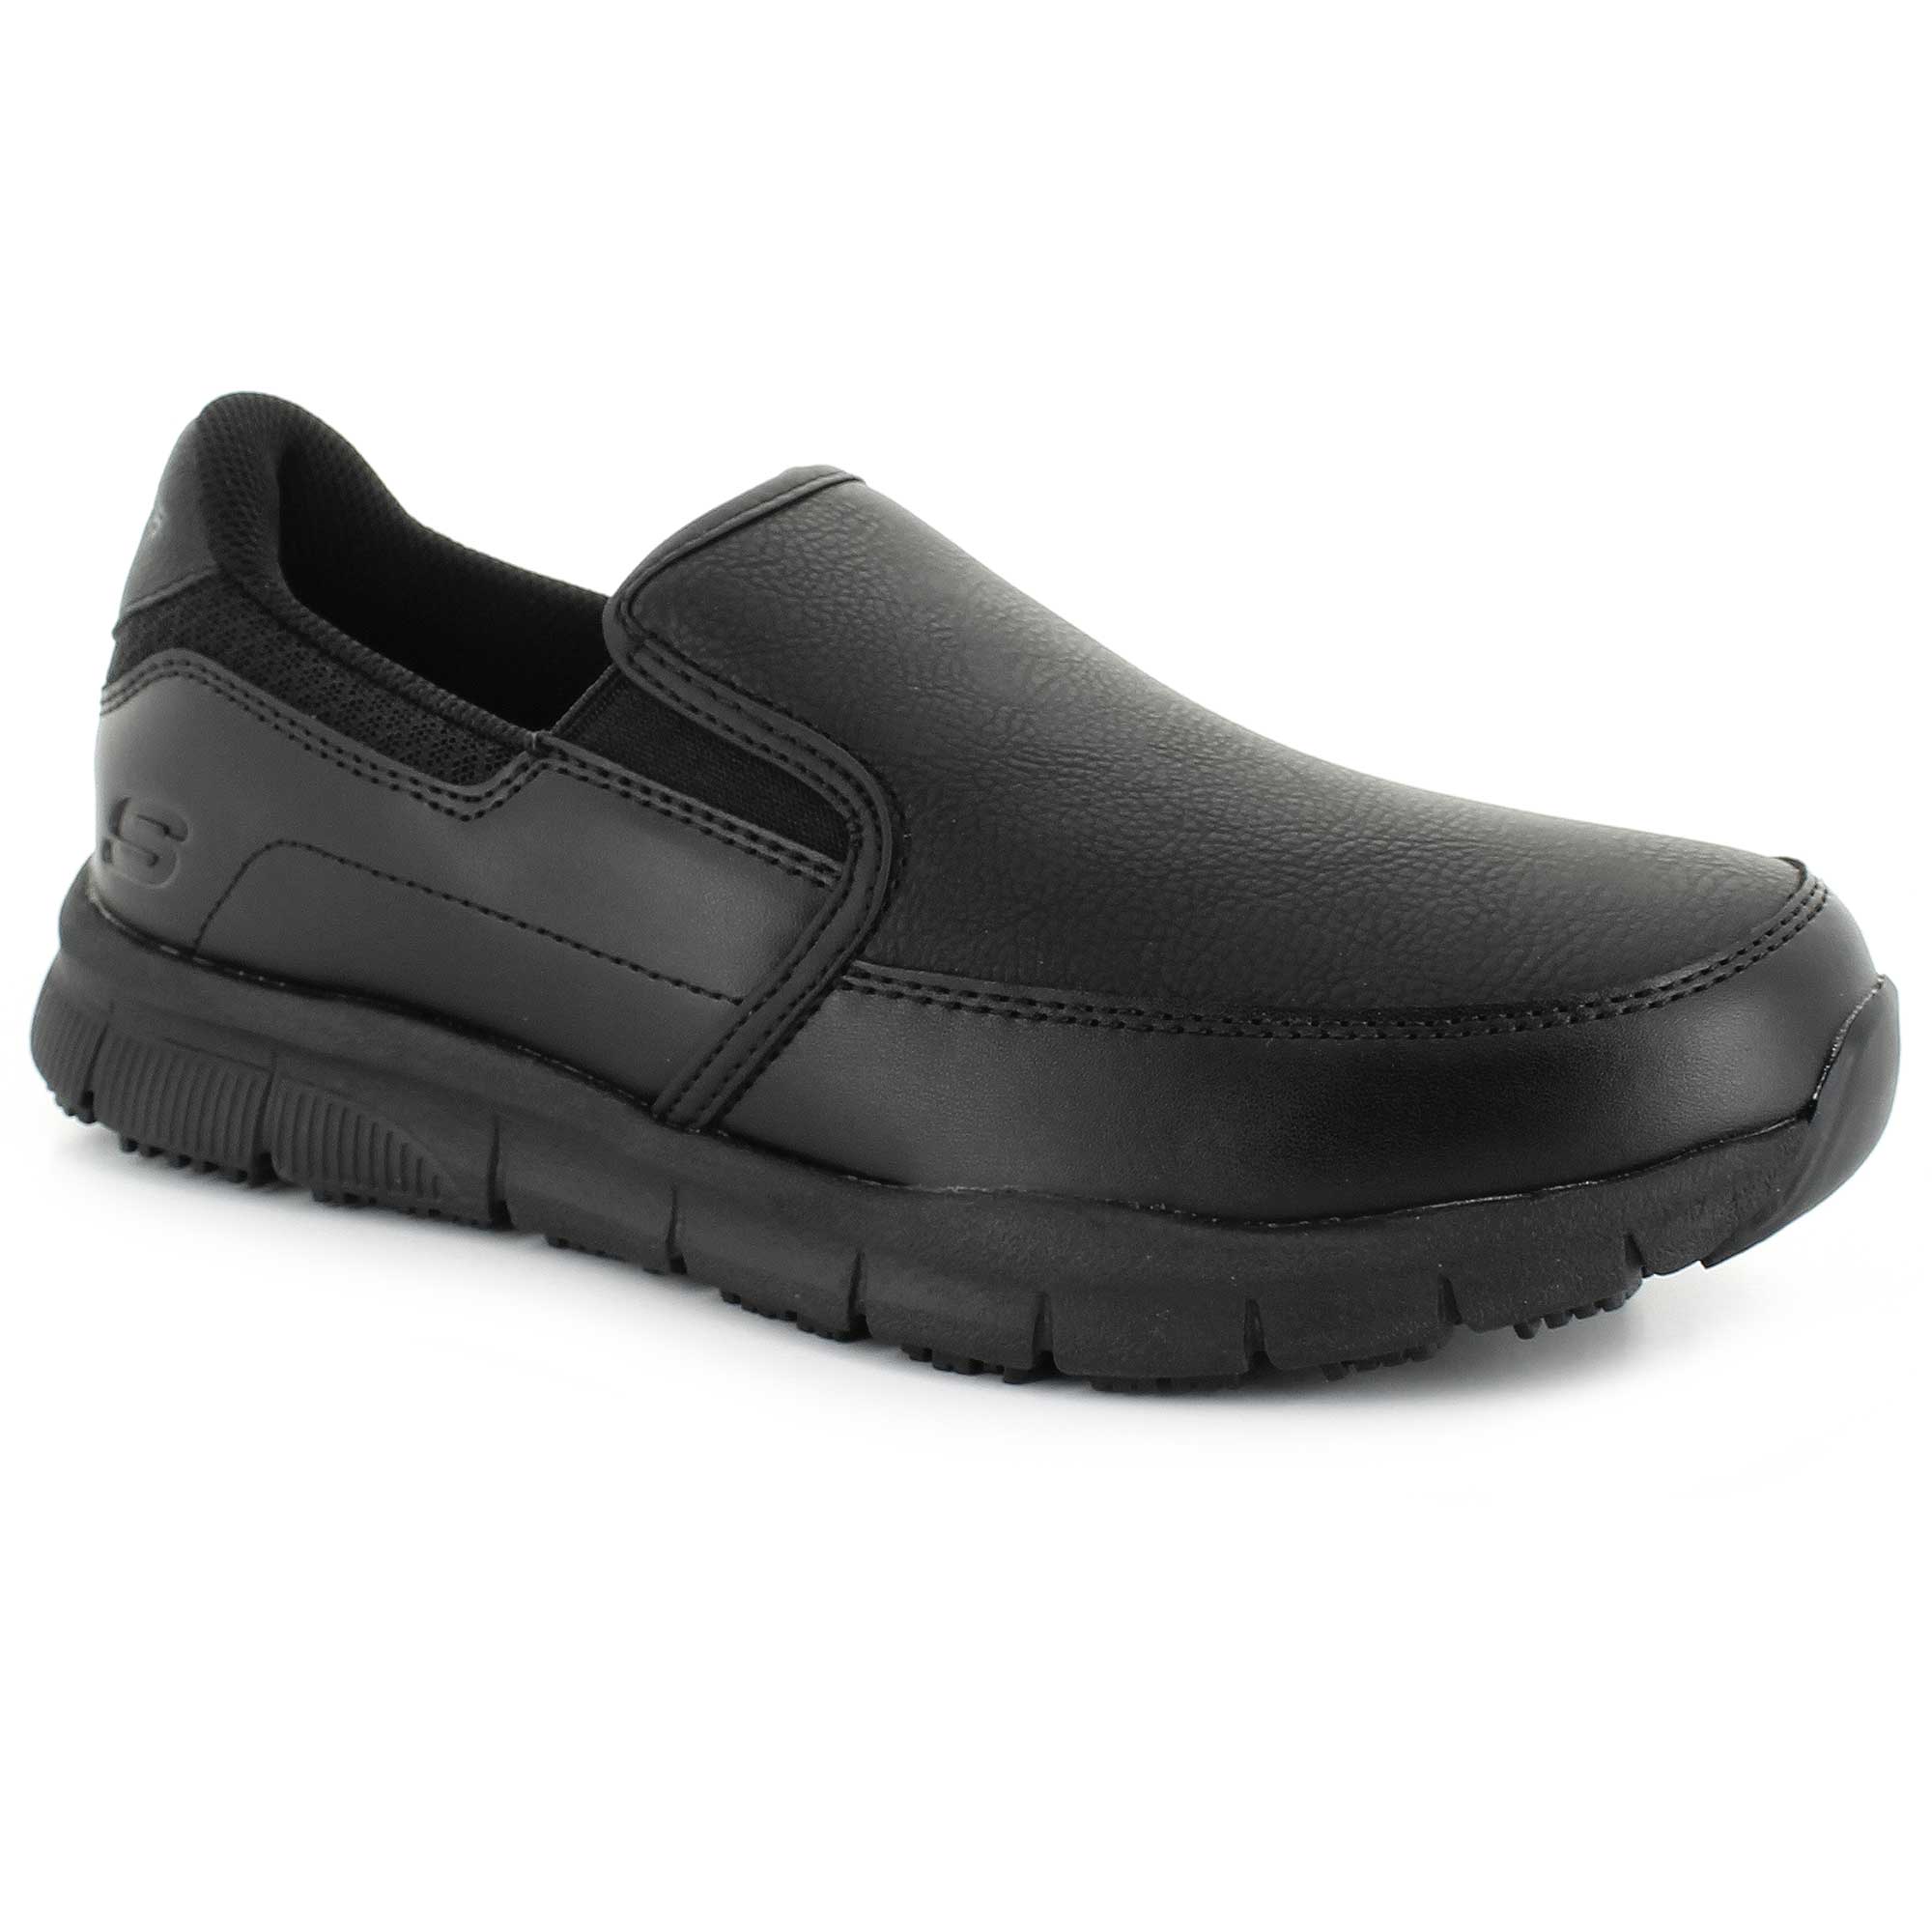 Skechers Work Relaxed Fit: Nampa - Annod SR 77236